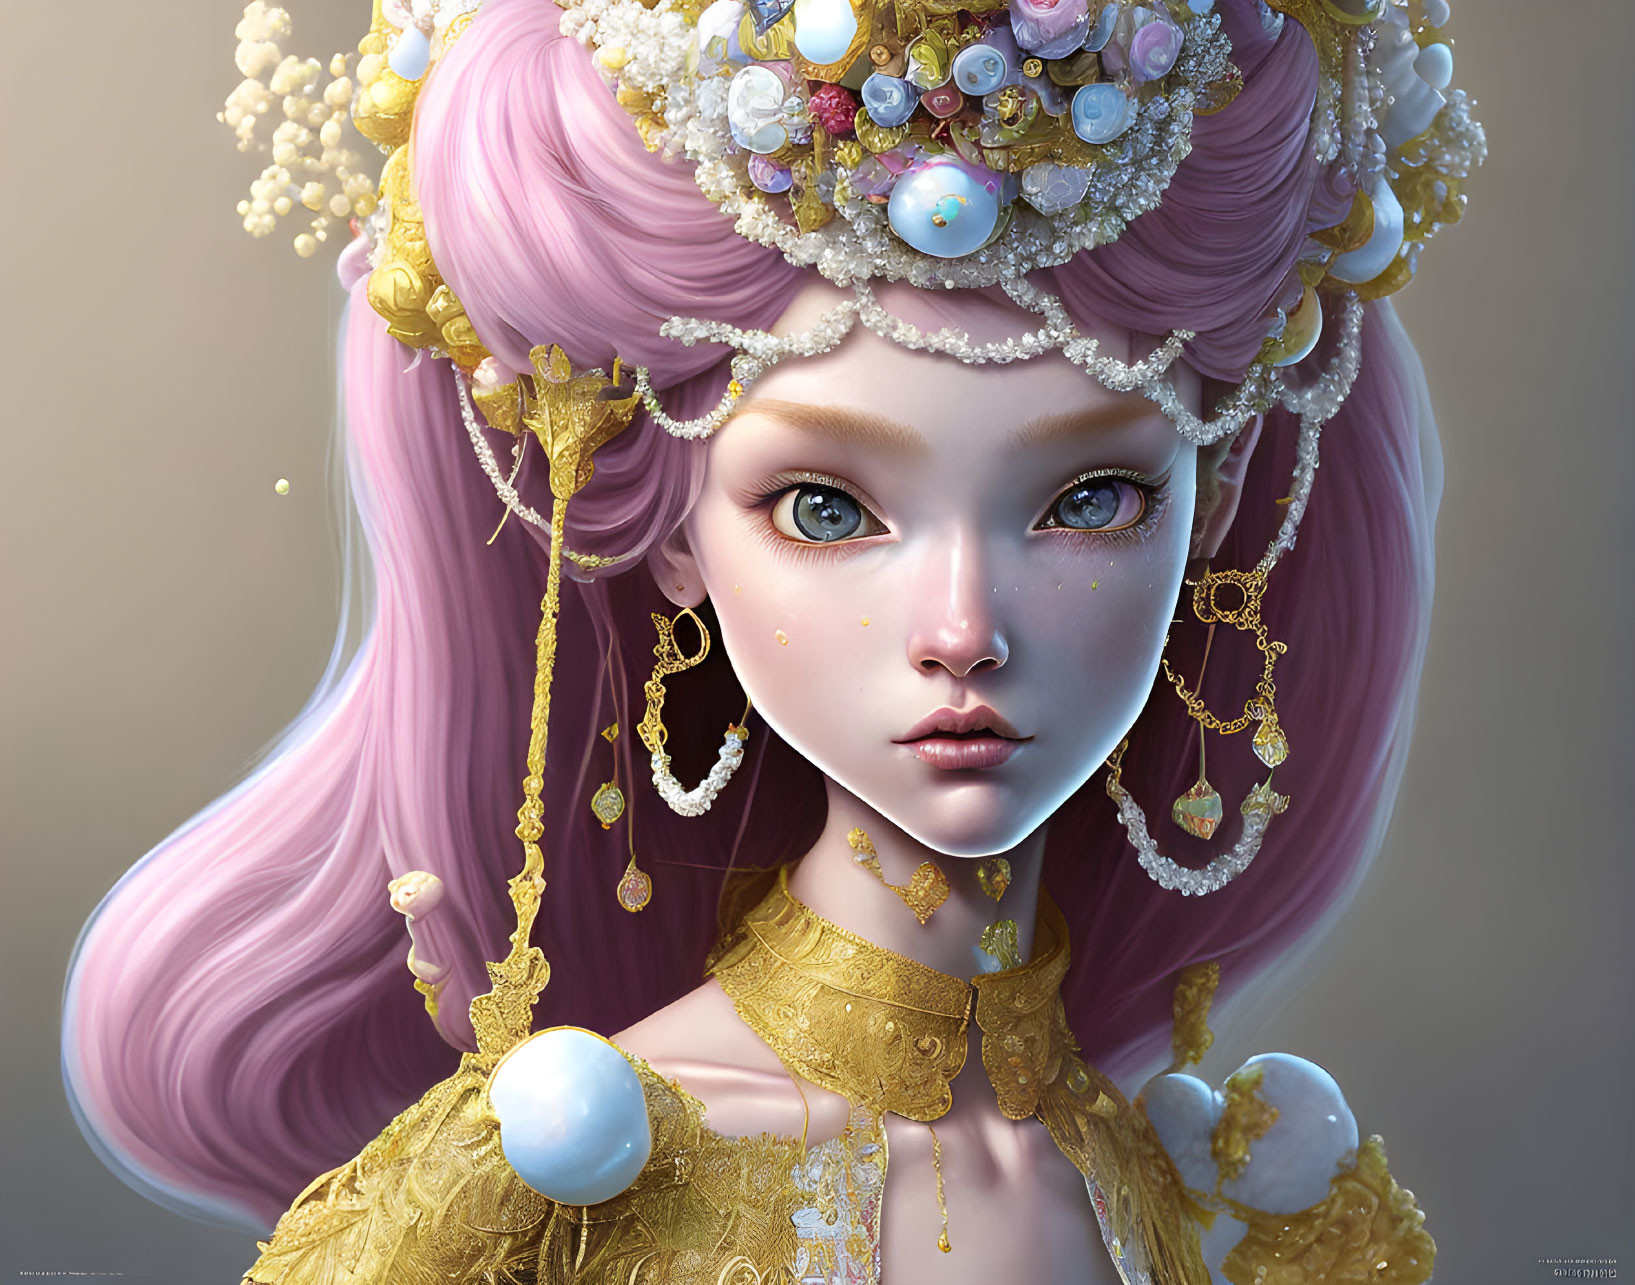 Fantasy digital art: Female character with pink hair, gold jewelry, and blue eyes